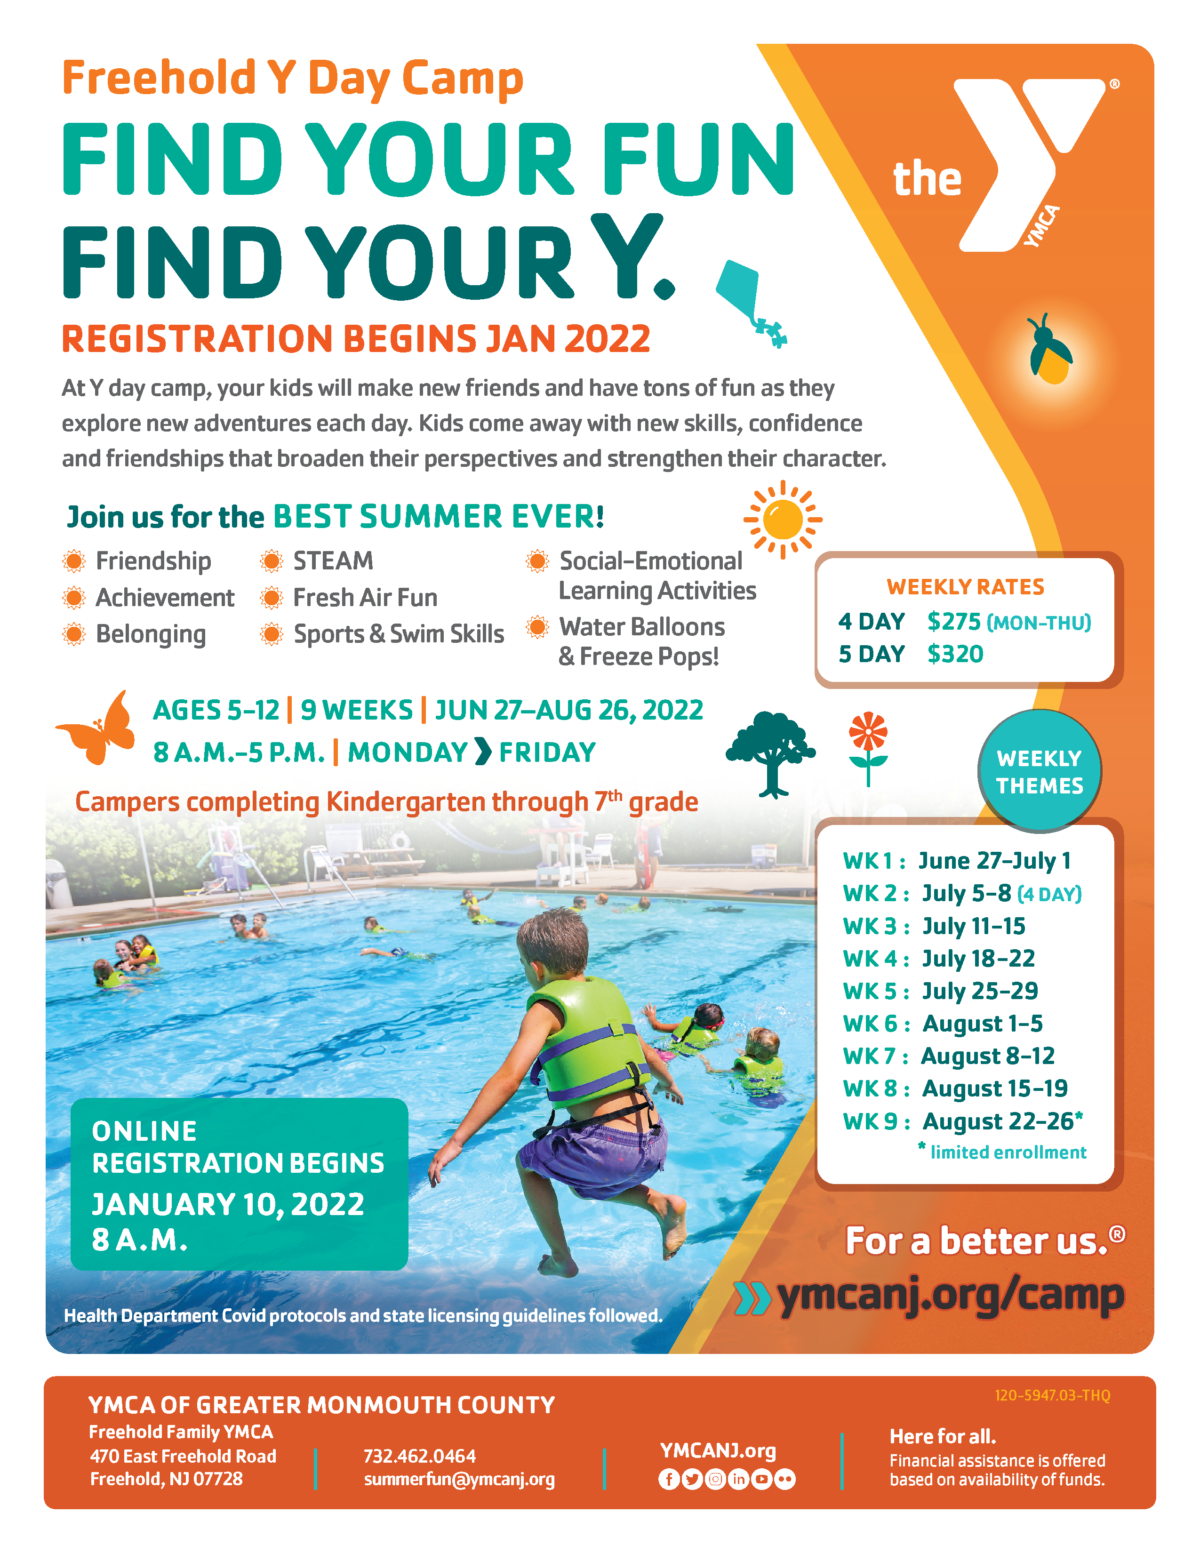 Freehold Day Camp YMCA of Greater Monmouth County